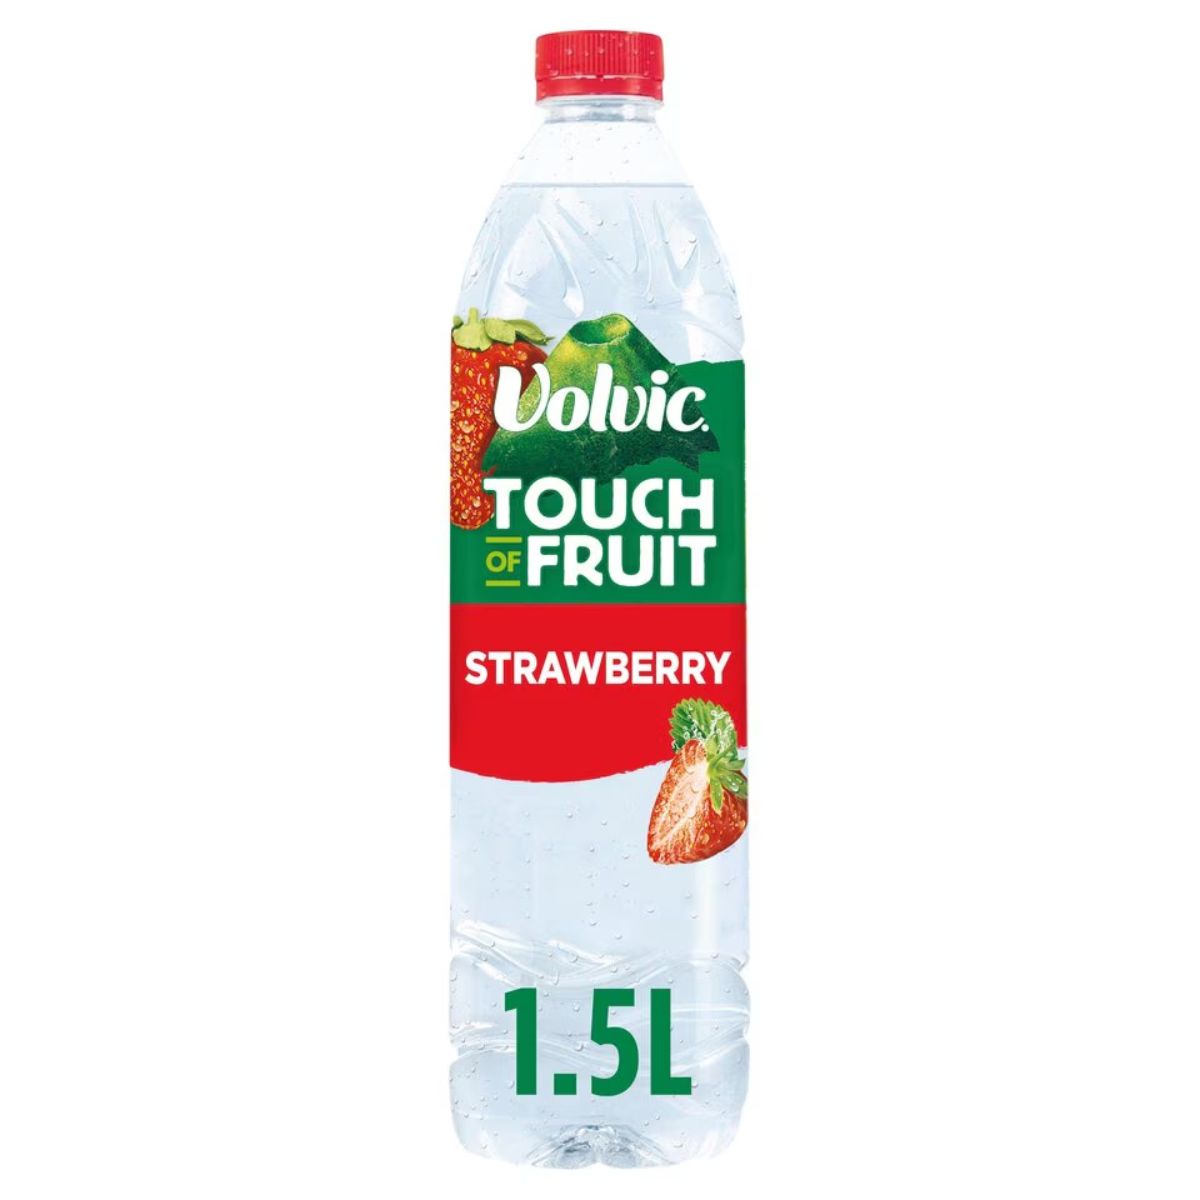 A Volvic - Touch of Fruit Strawberry Flavoured Water - 1.5L bottle.